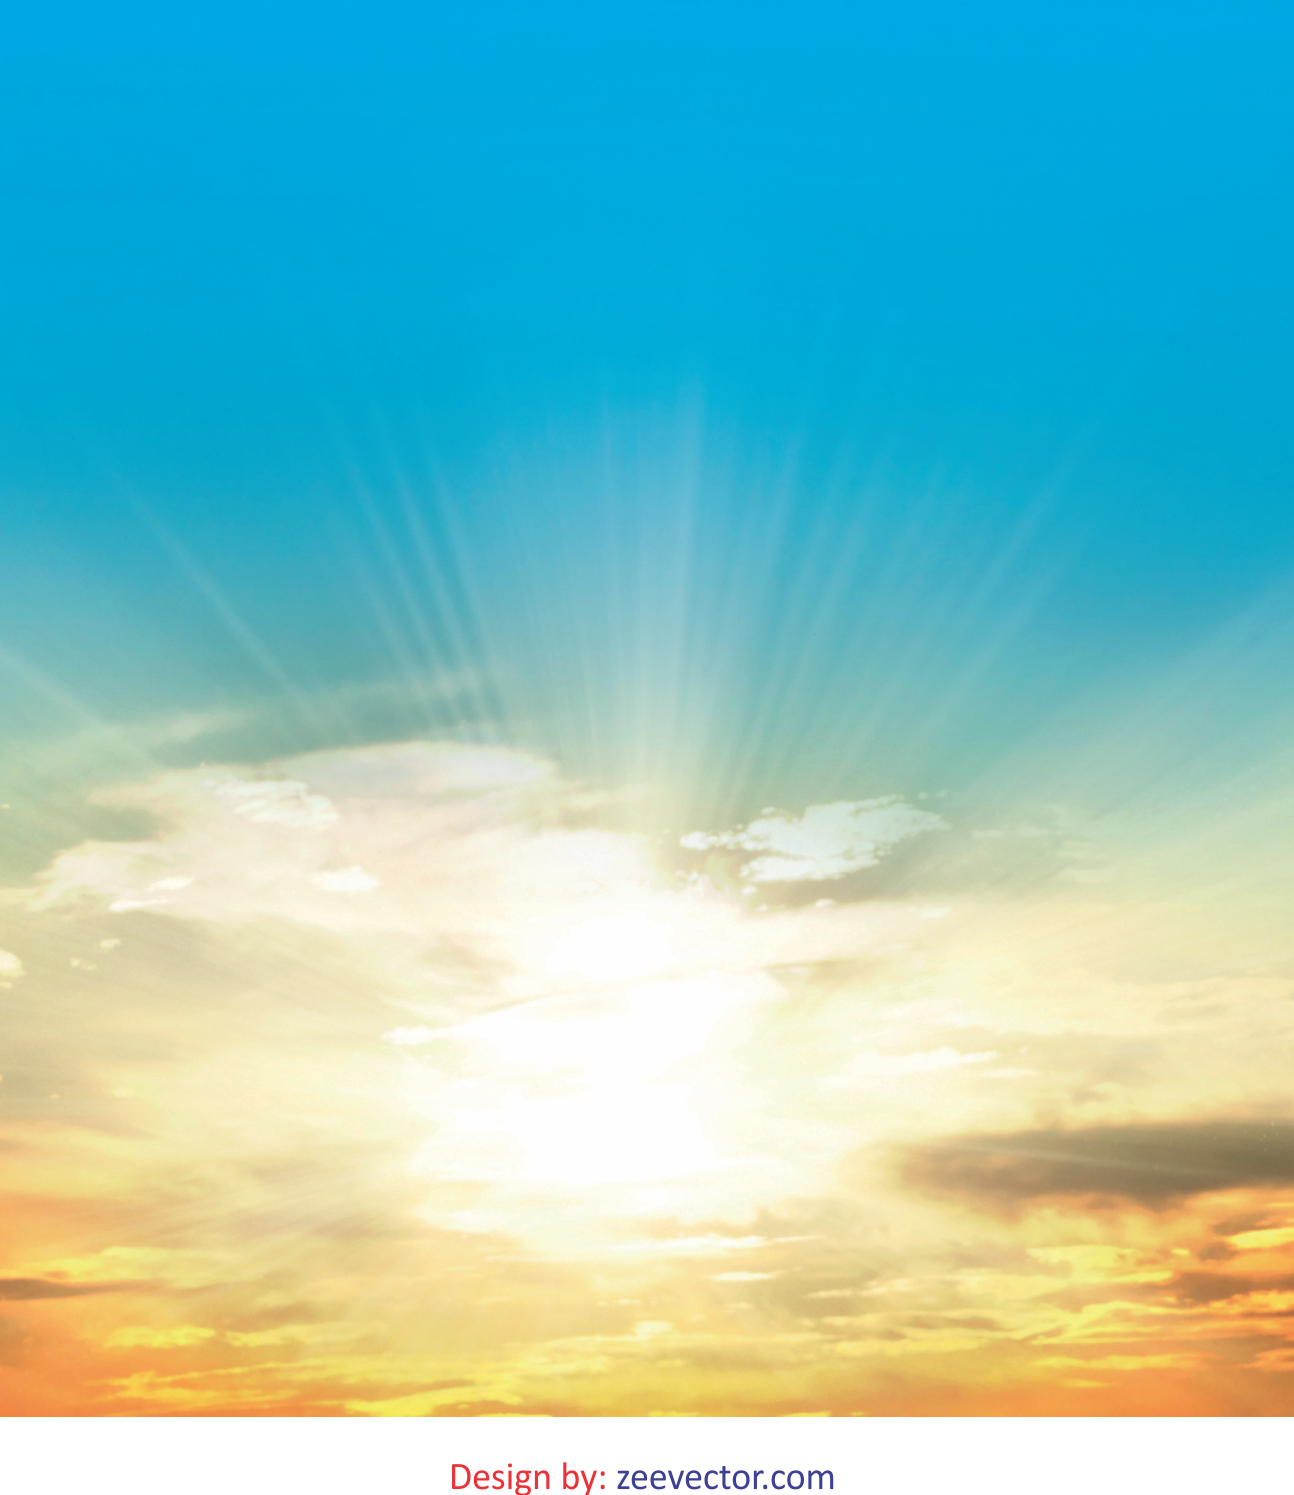 Details 100 sky background hd png - Abzlocal.mx